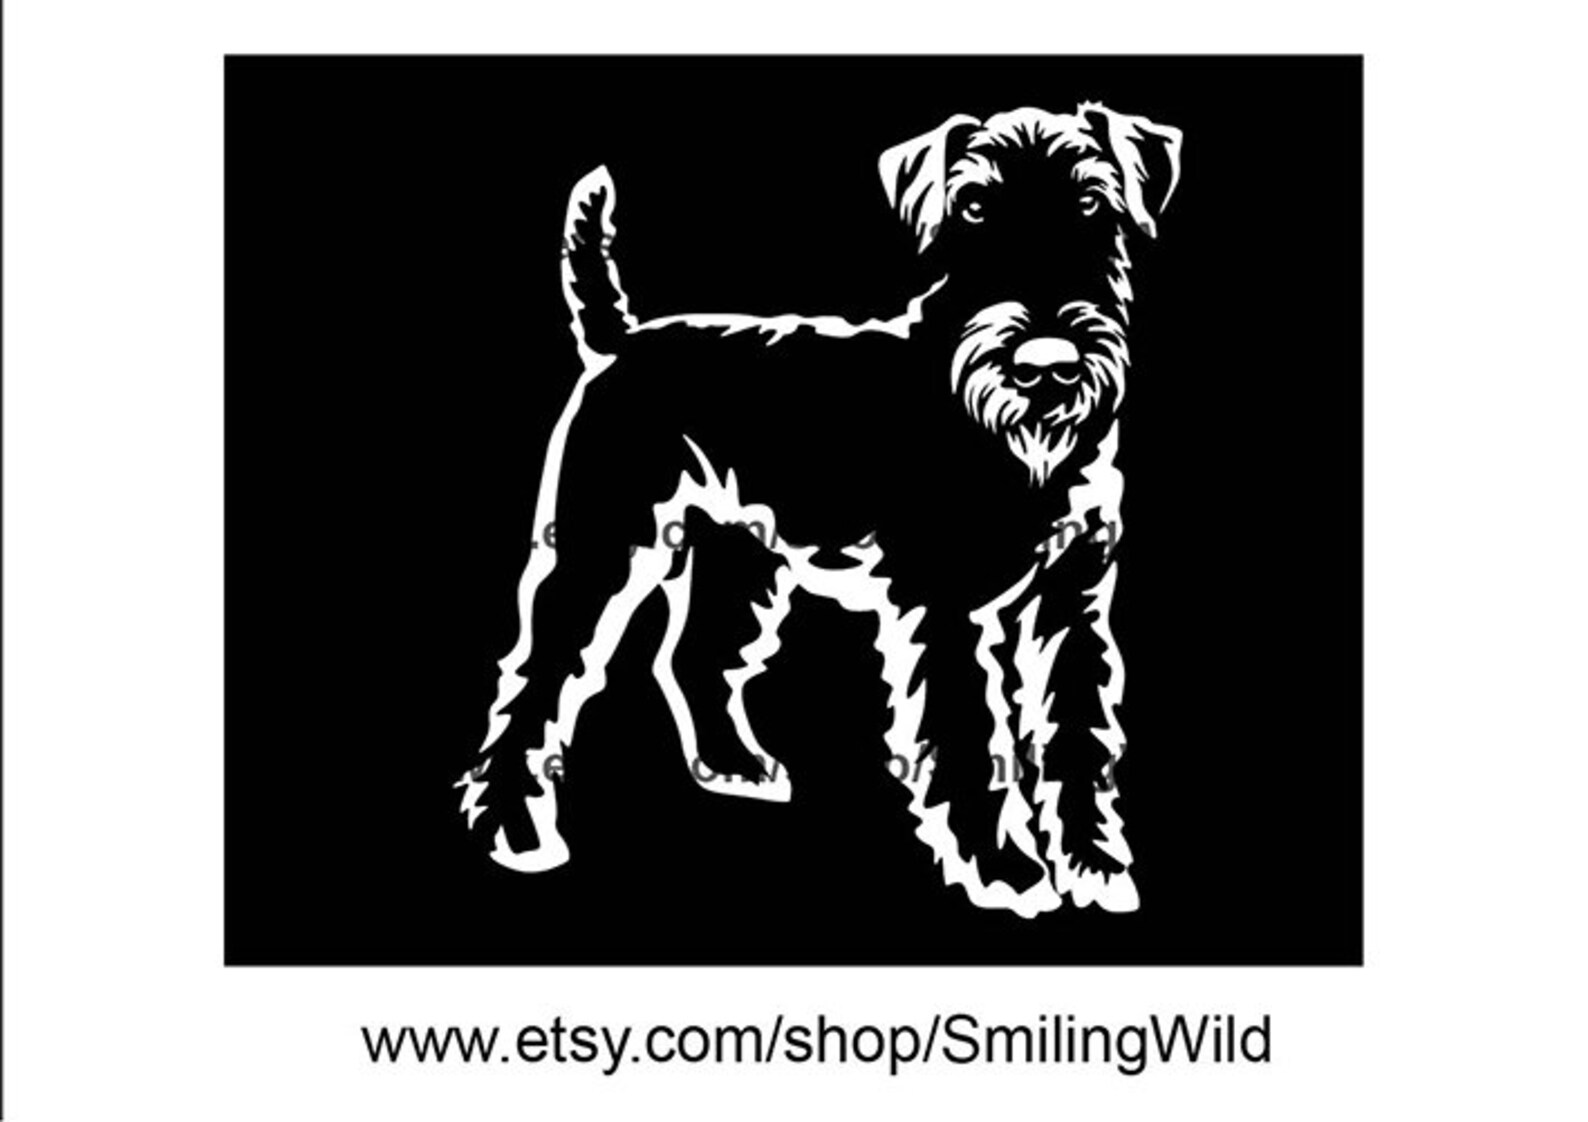 Airedale Terrier svg clipart cut in White Print on Black | Etsy